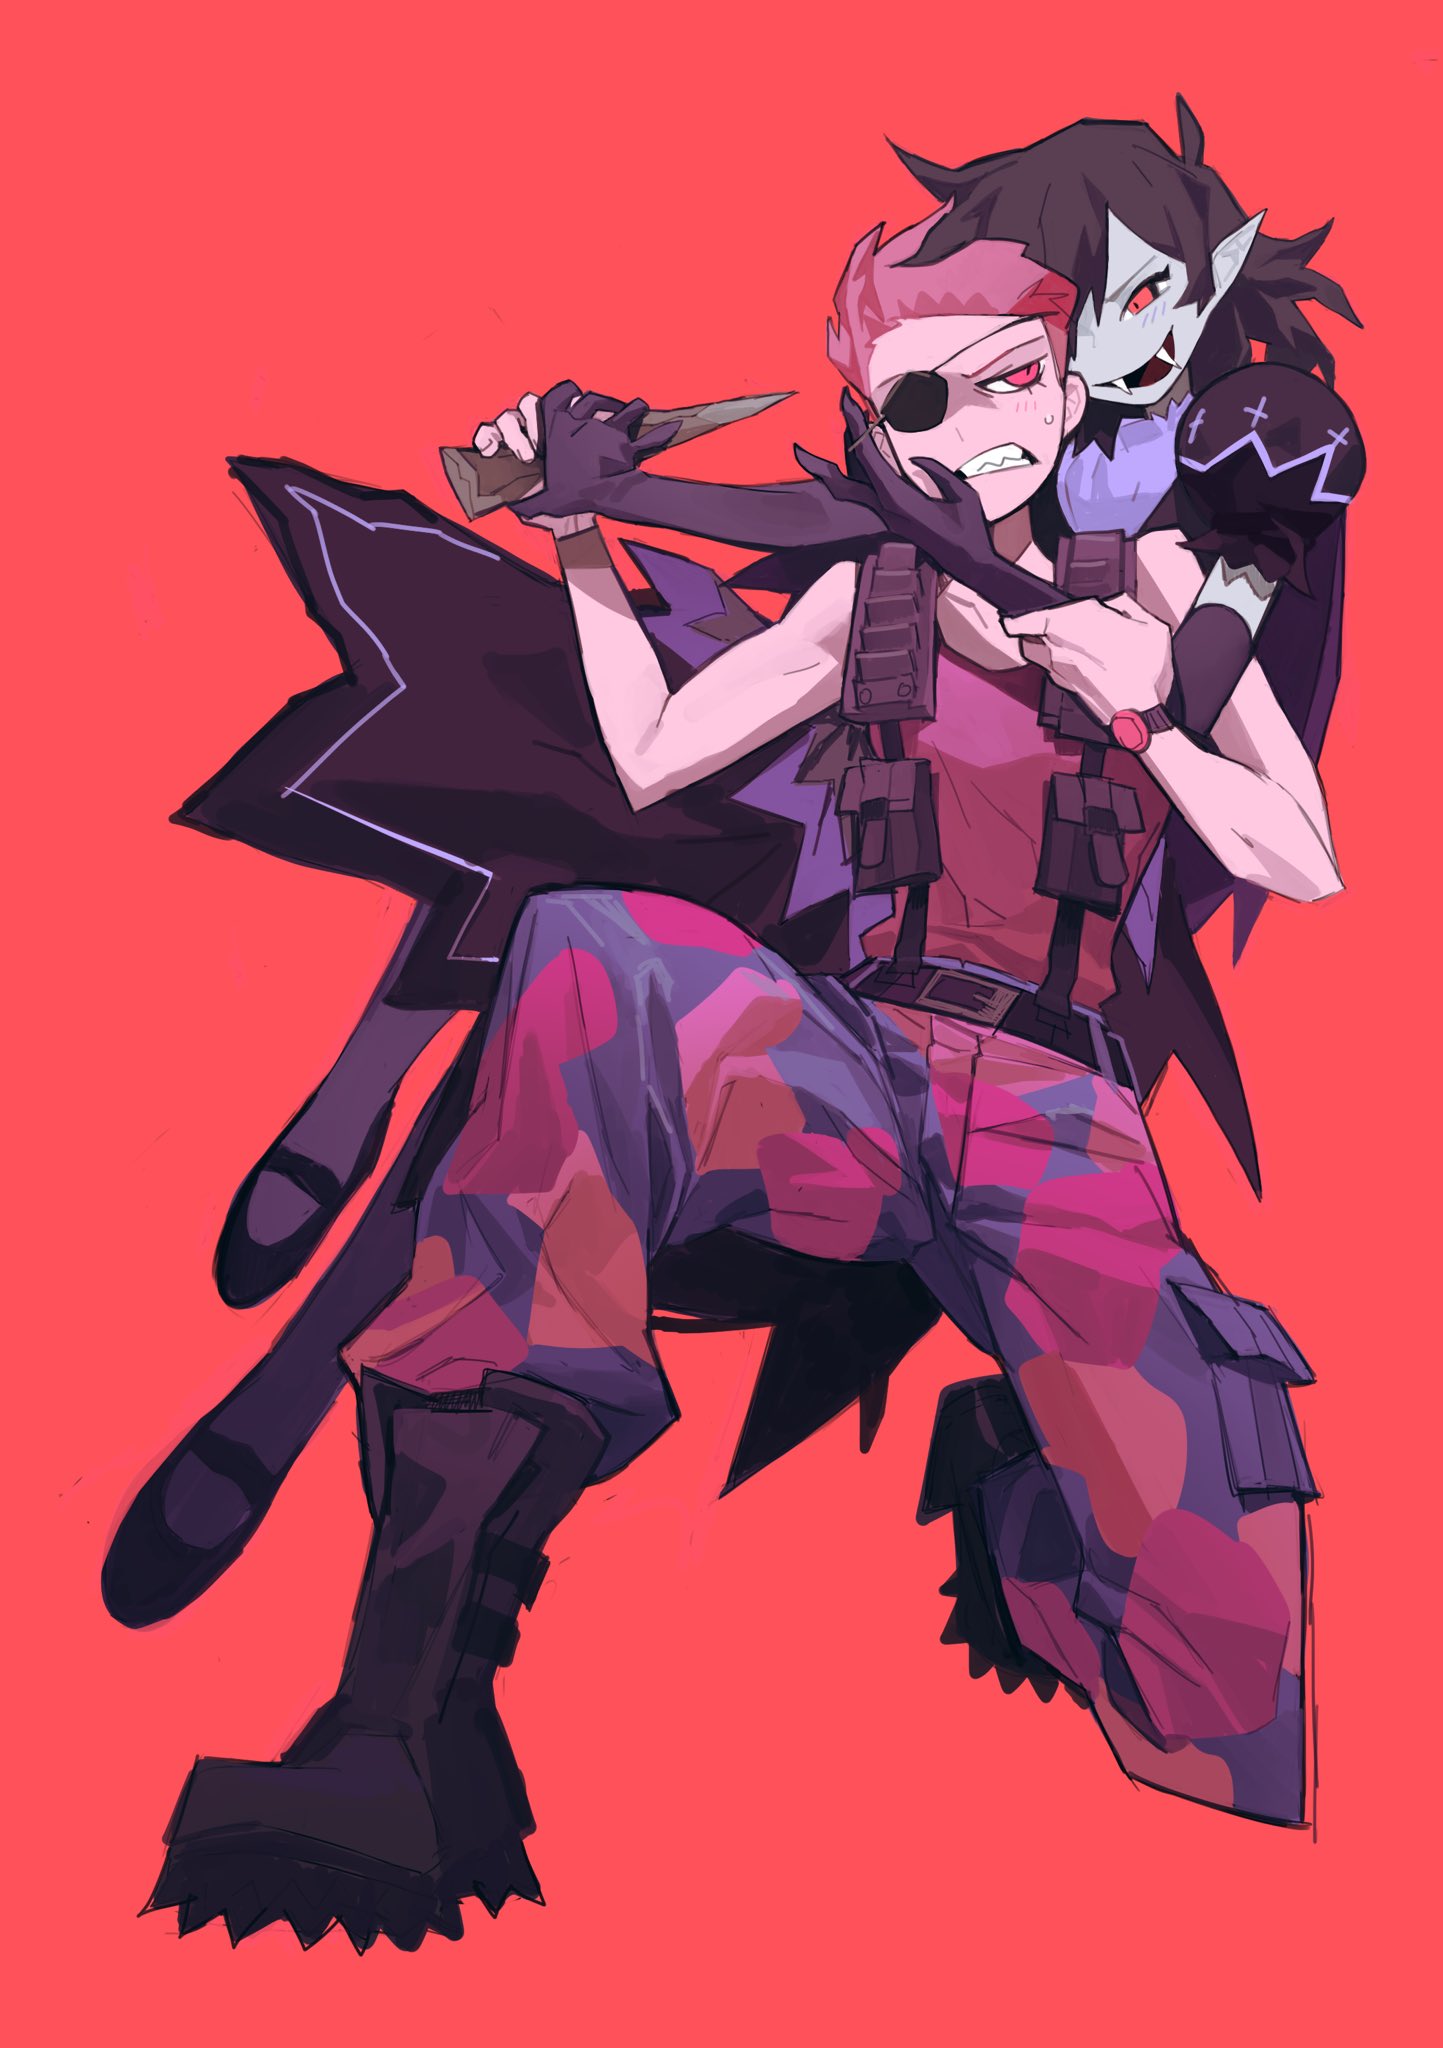 2girls adventure_time adventure_time:fionna_and_cake black_gloves boots camouflage camouflage_pants colored_skin eyepatch fangs gloves highres knifedragon marceline_abadeer multiple_girls pants pink_hair pink_skin pointy_ears princess_bonnibel_bubblegum red_background red_eyes short_hair simple_background stake tank_top vampire